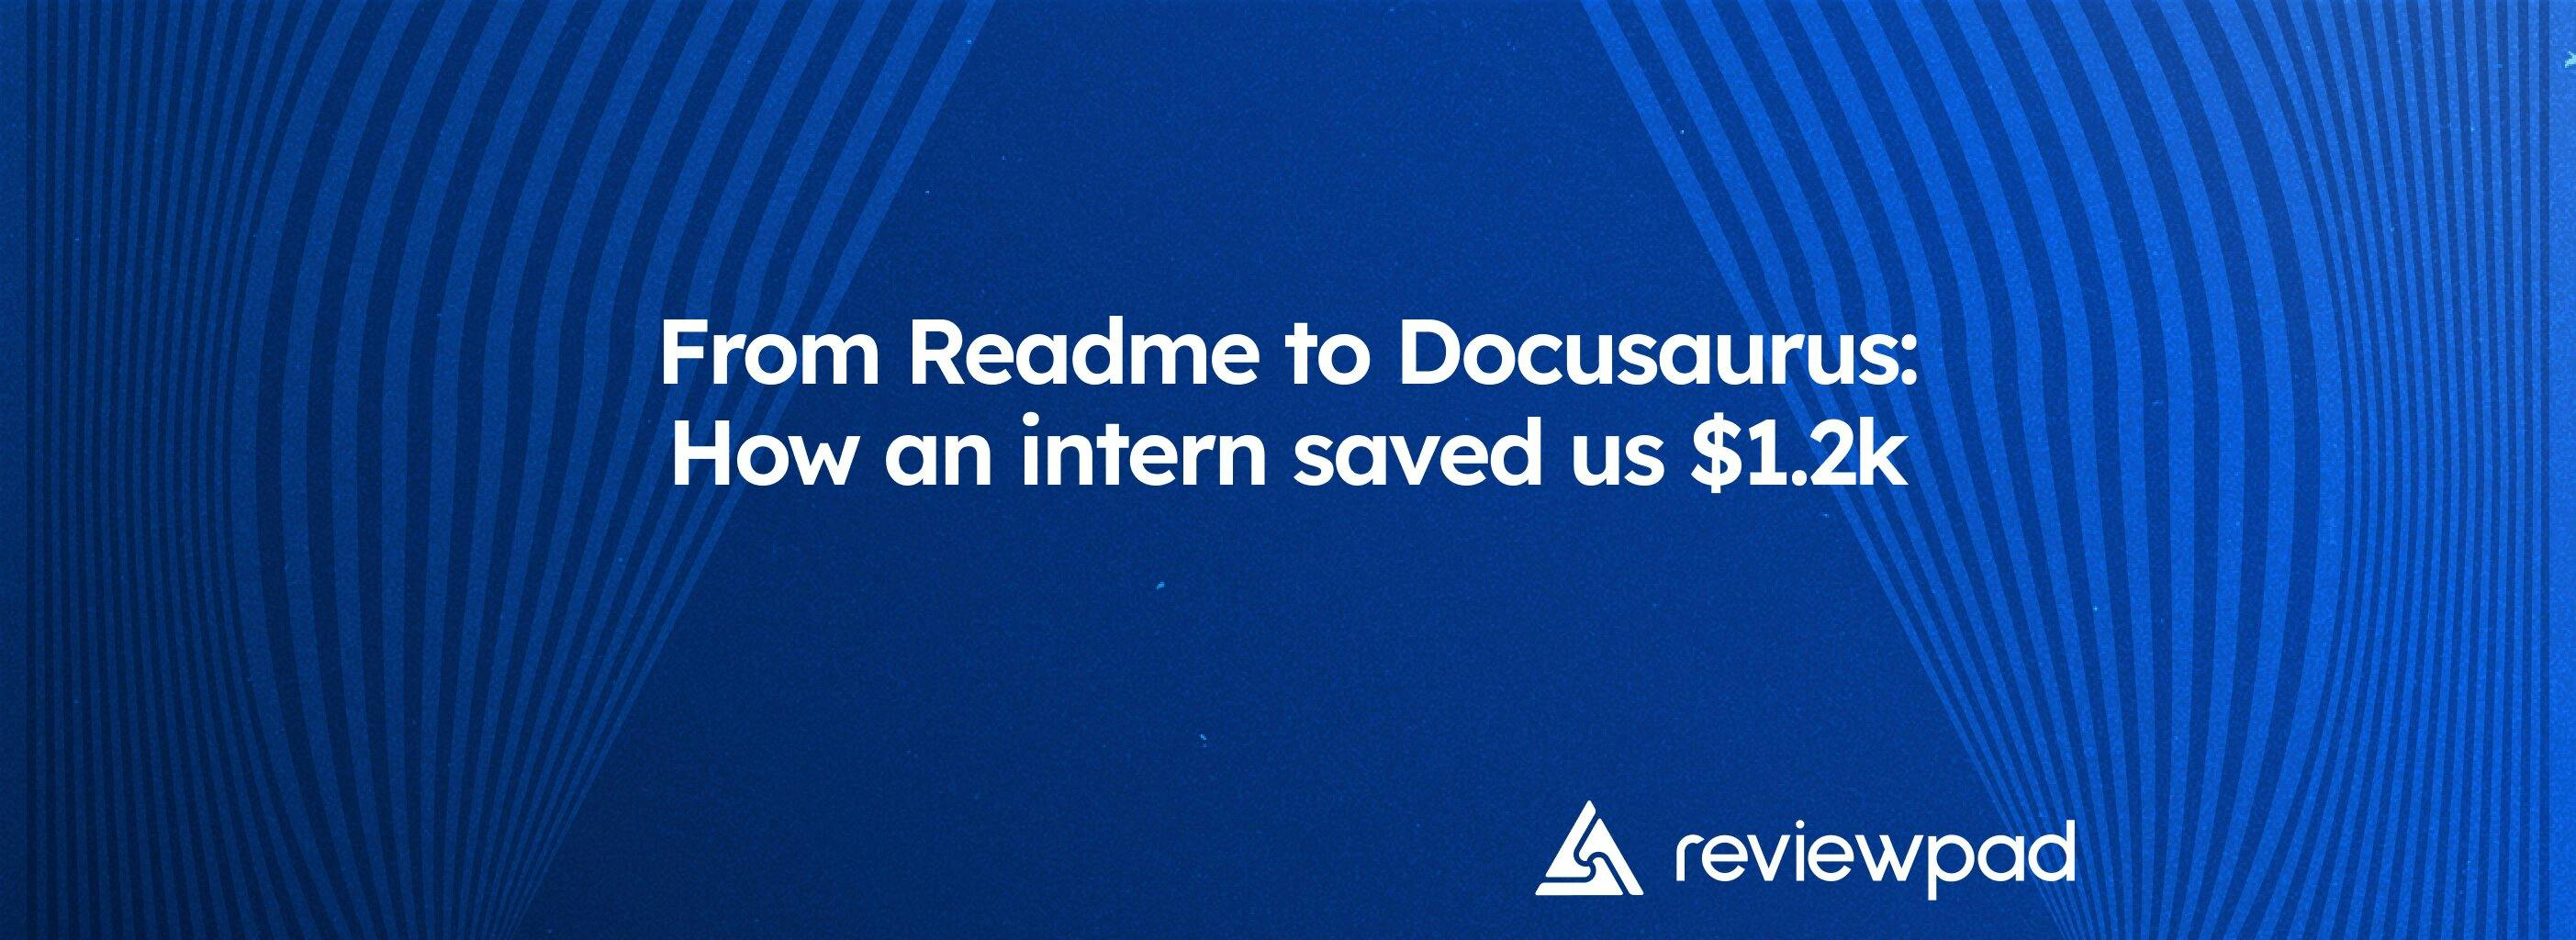 From Readme to Docusaurus: How an intern saved us $1.2k